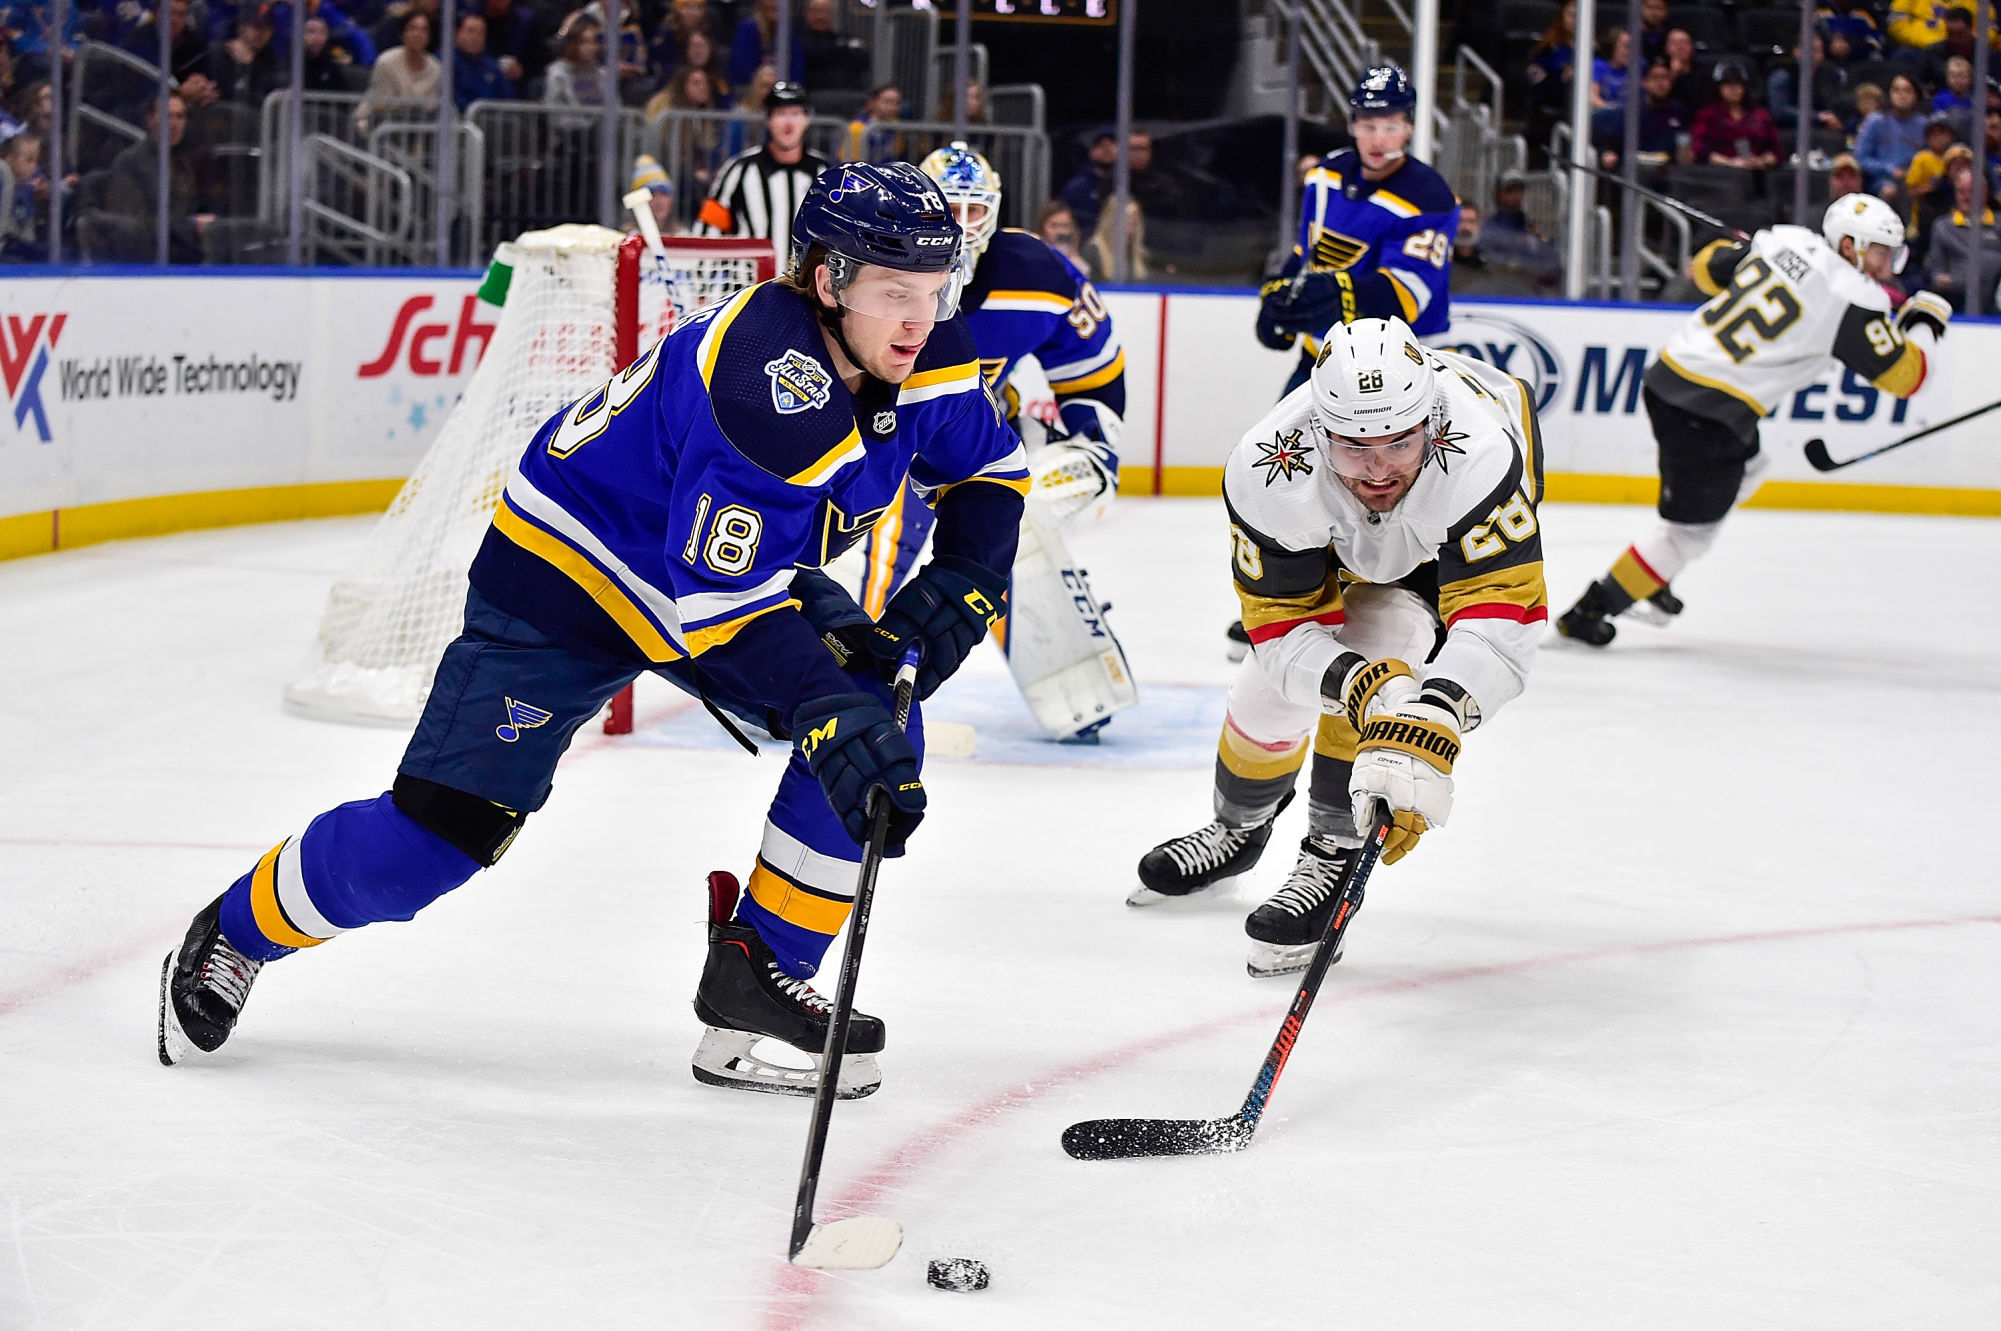 Dec 12, 2019; St. Louis, MO, USA; St. Louis Blues center Robert Thomas (18) handles the puck as Vegas Golden Knights left wing William Carrier (28) defends during the first period at Enterprise Center. Mandatory Credit: Jeff Curry-USA TODAY Sports 

Photo by Icon Sport - Robert THOMAS - William CARRIER - Enterprise Center - St Louis (Etats Unis)